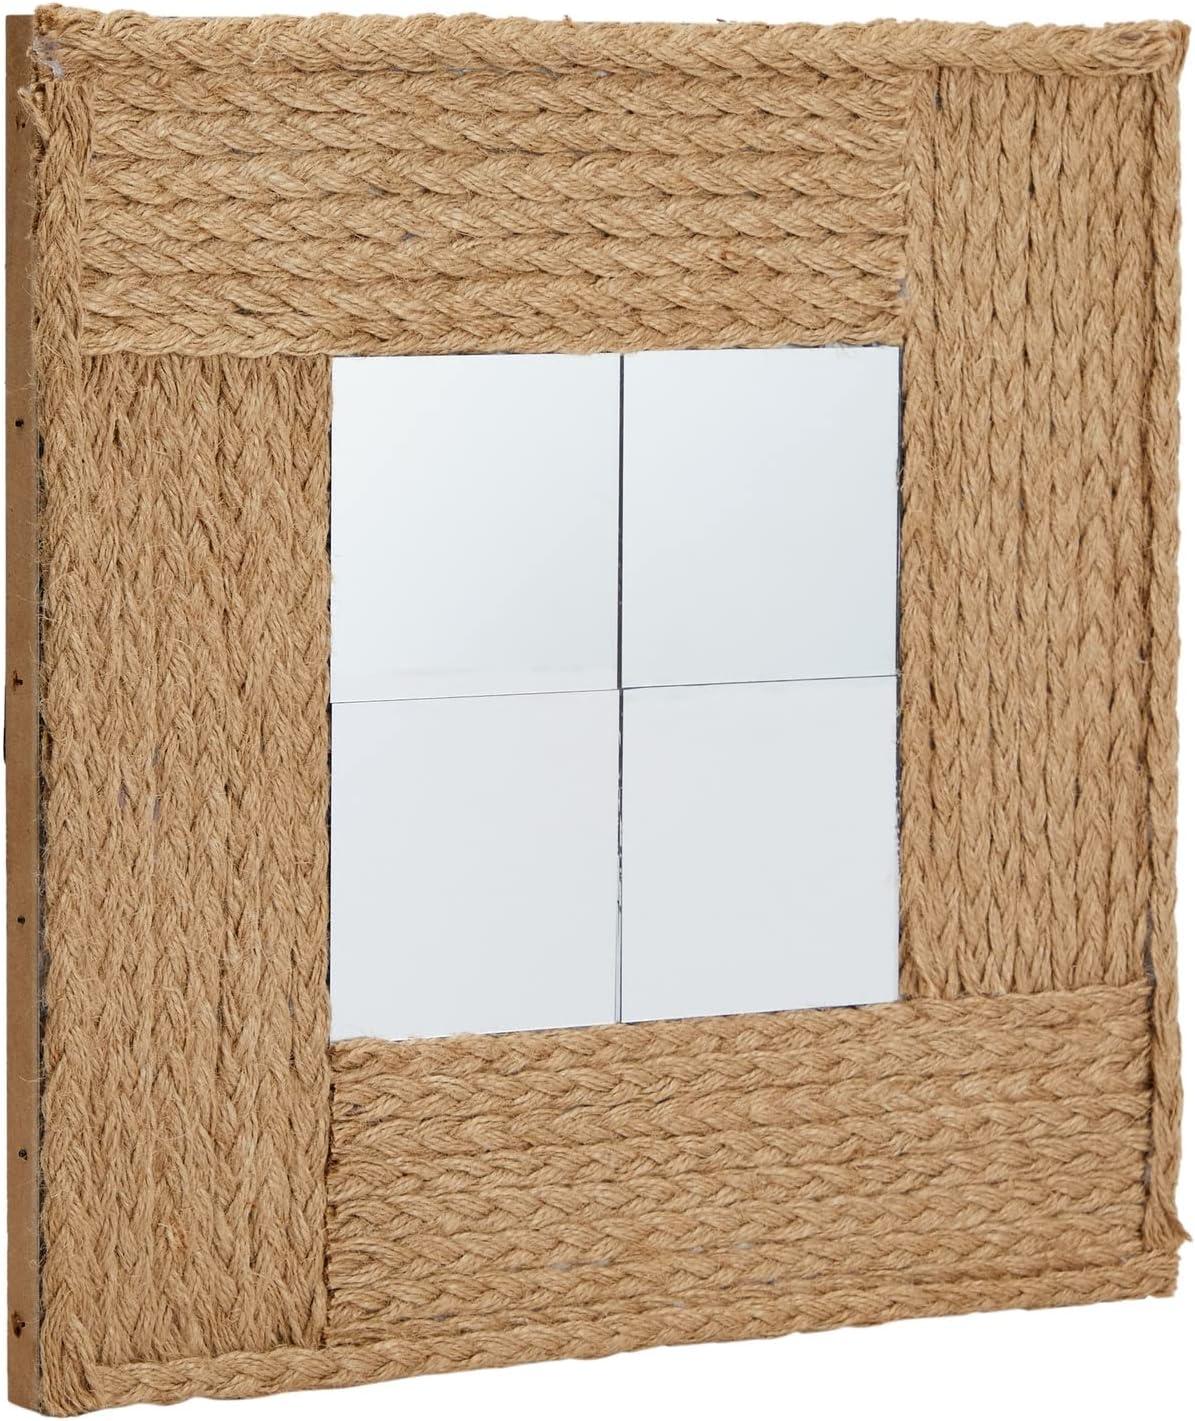 small mirrors for crafts